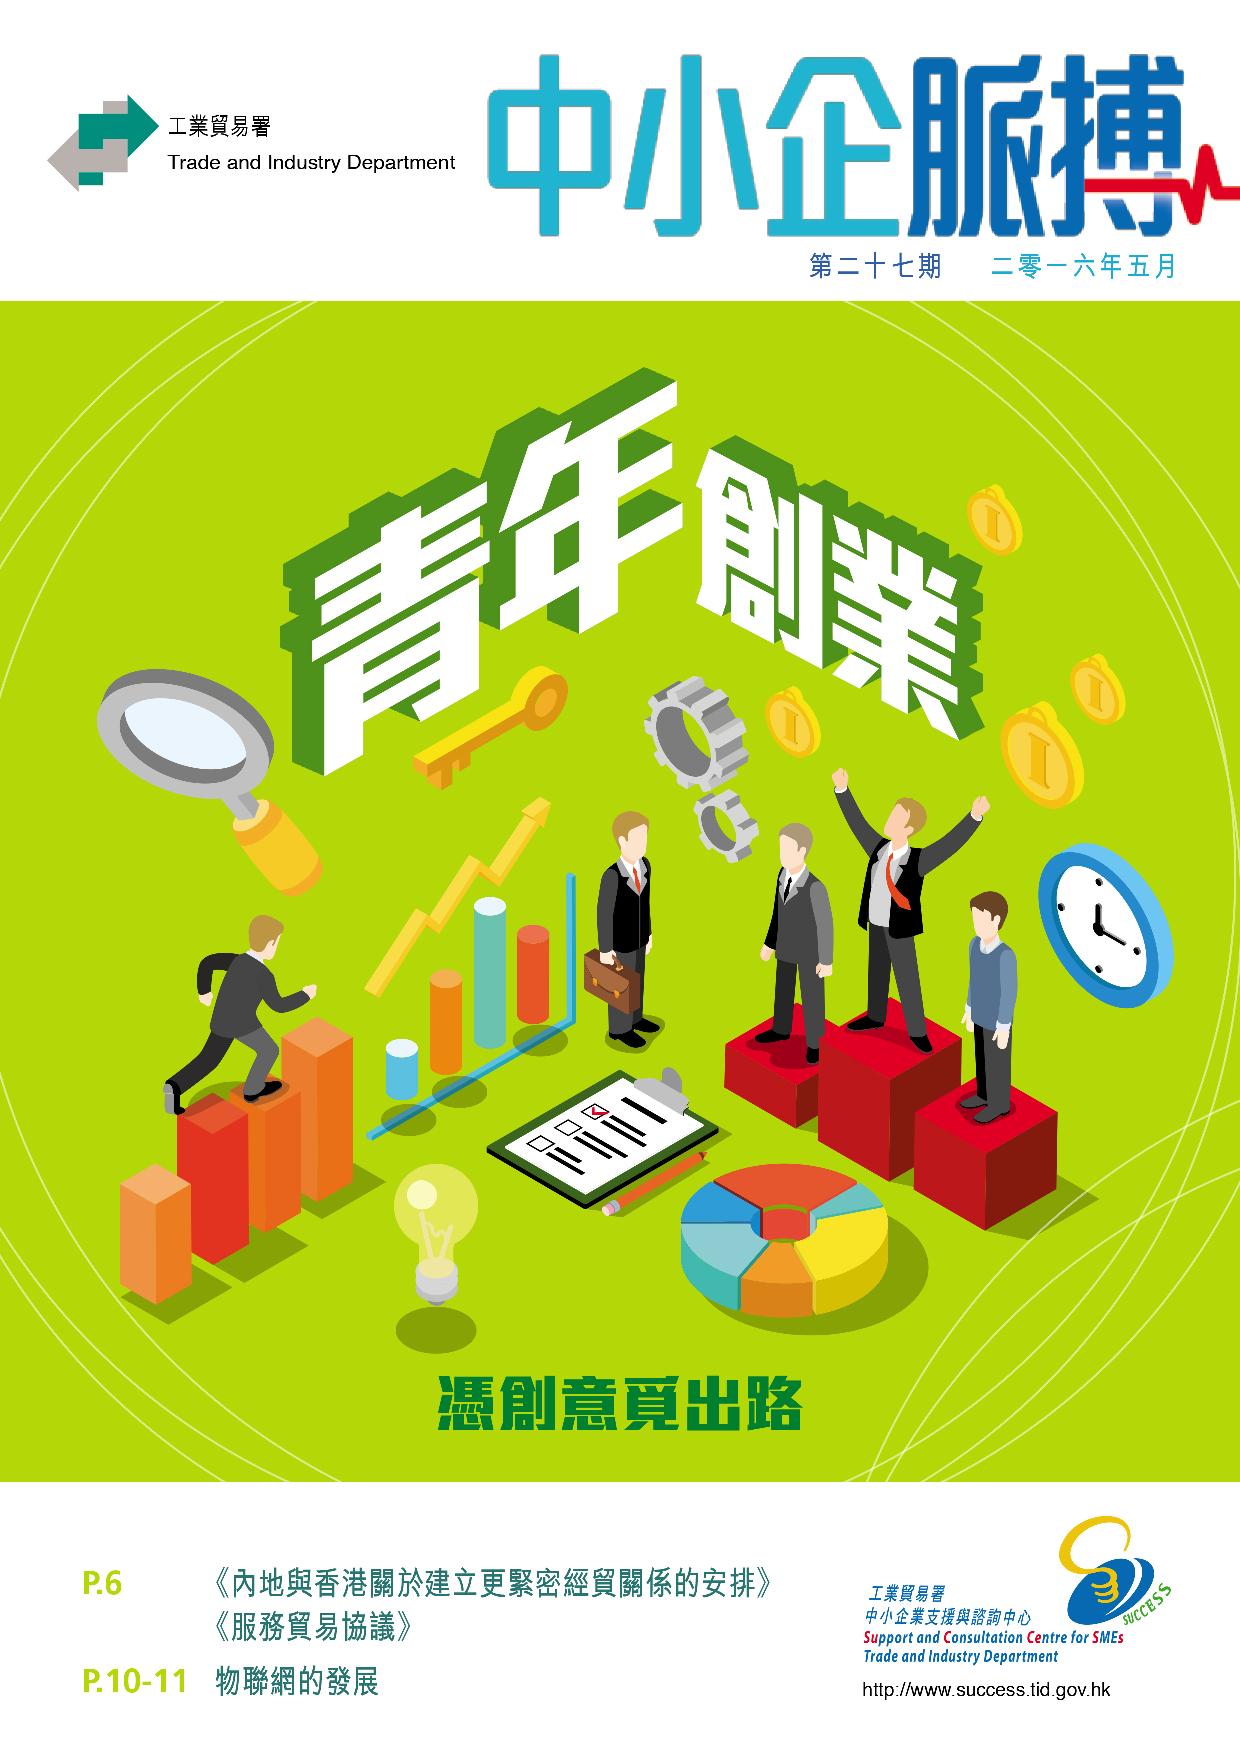 Twenty-Seventh Issue (May 2016) (Only available in Chinese)